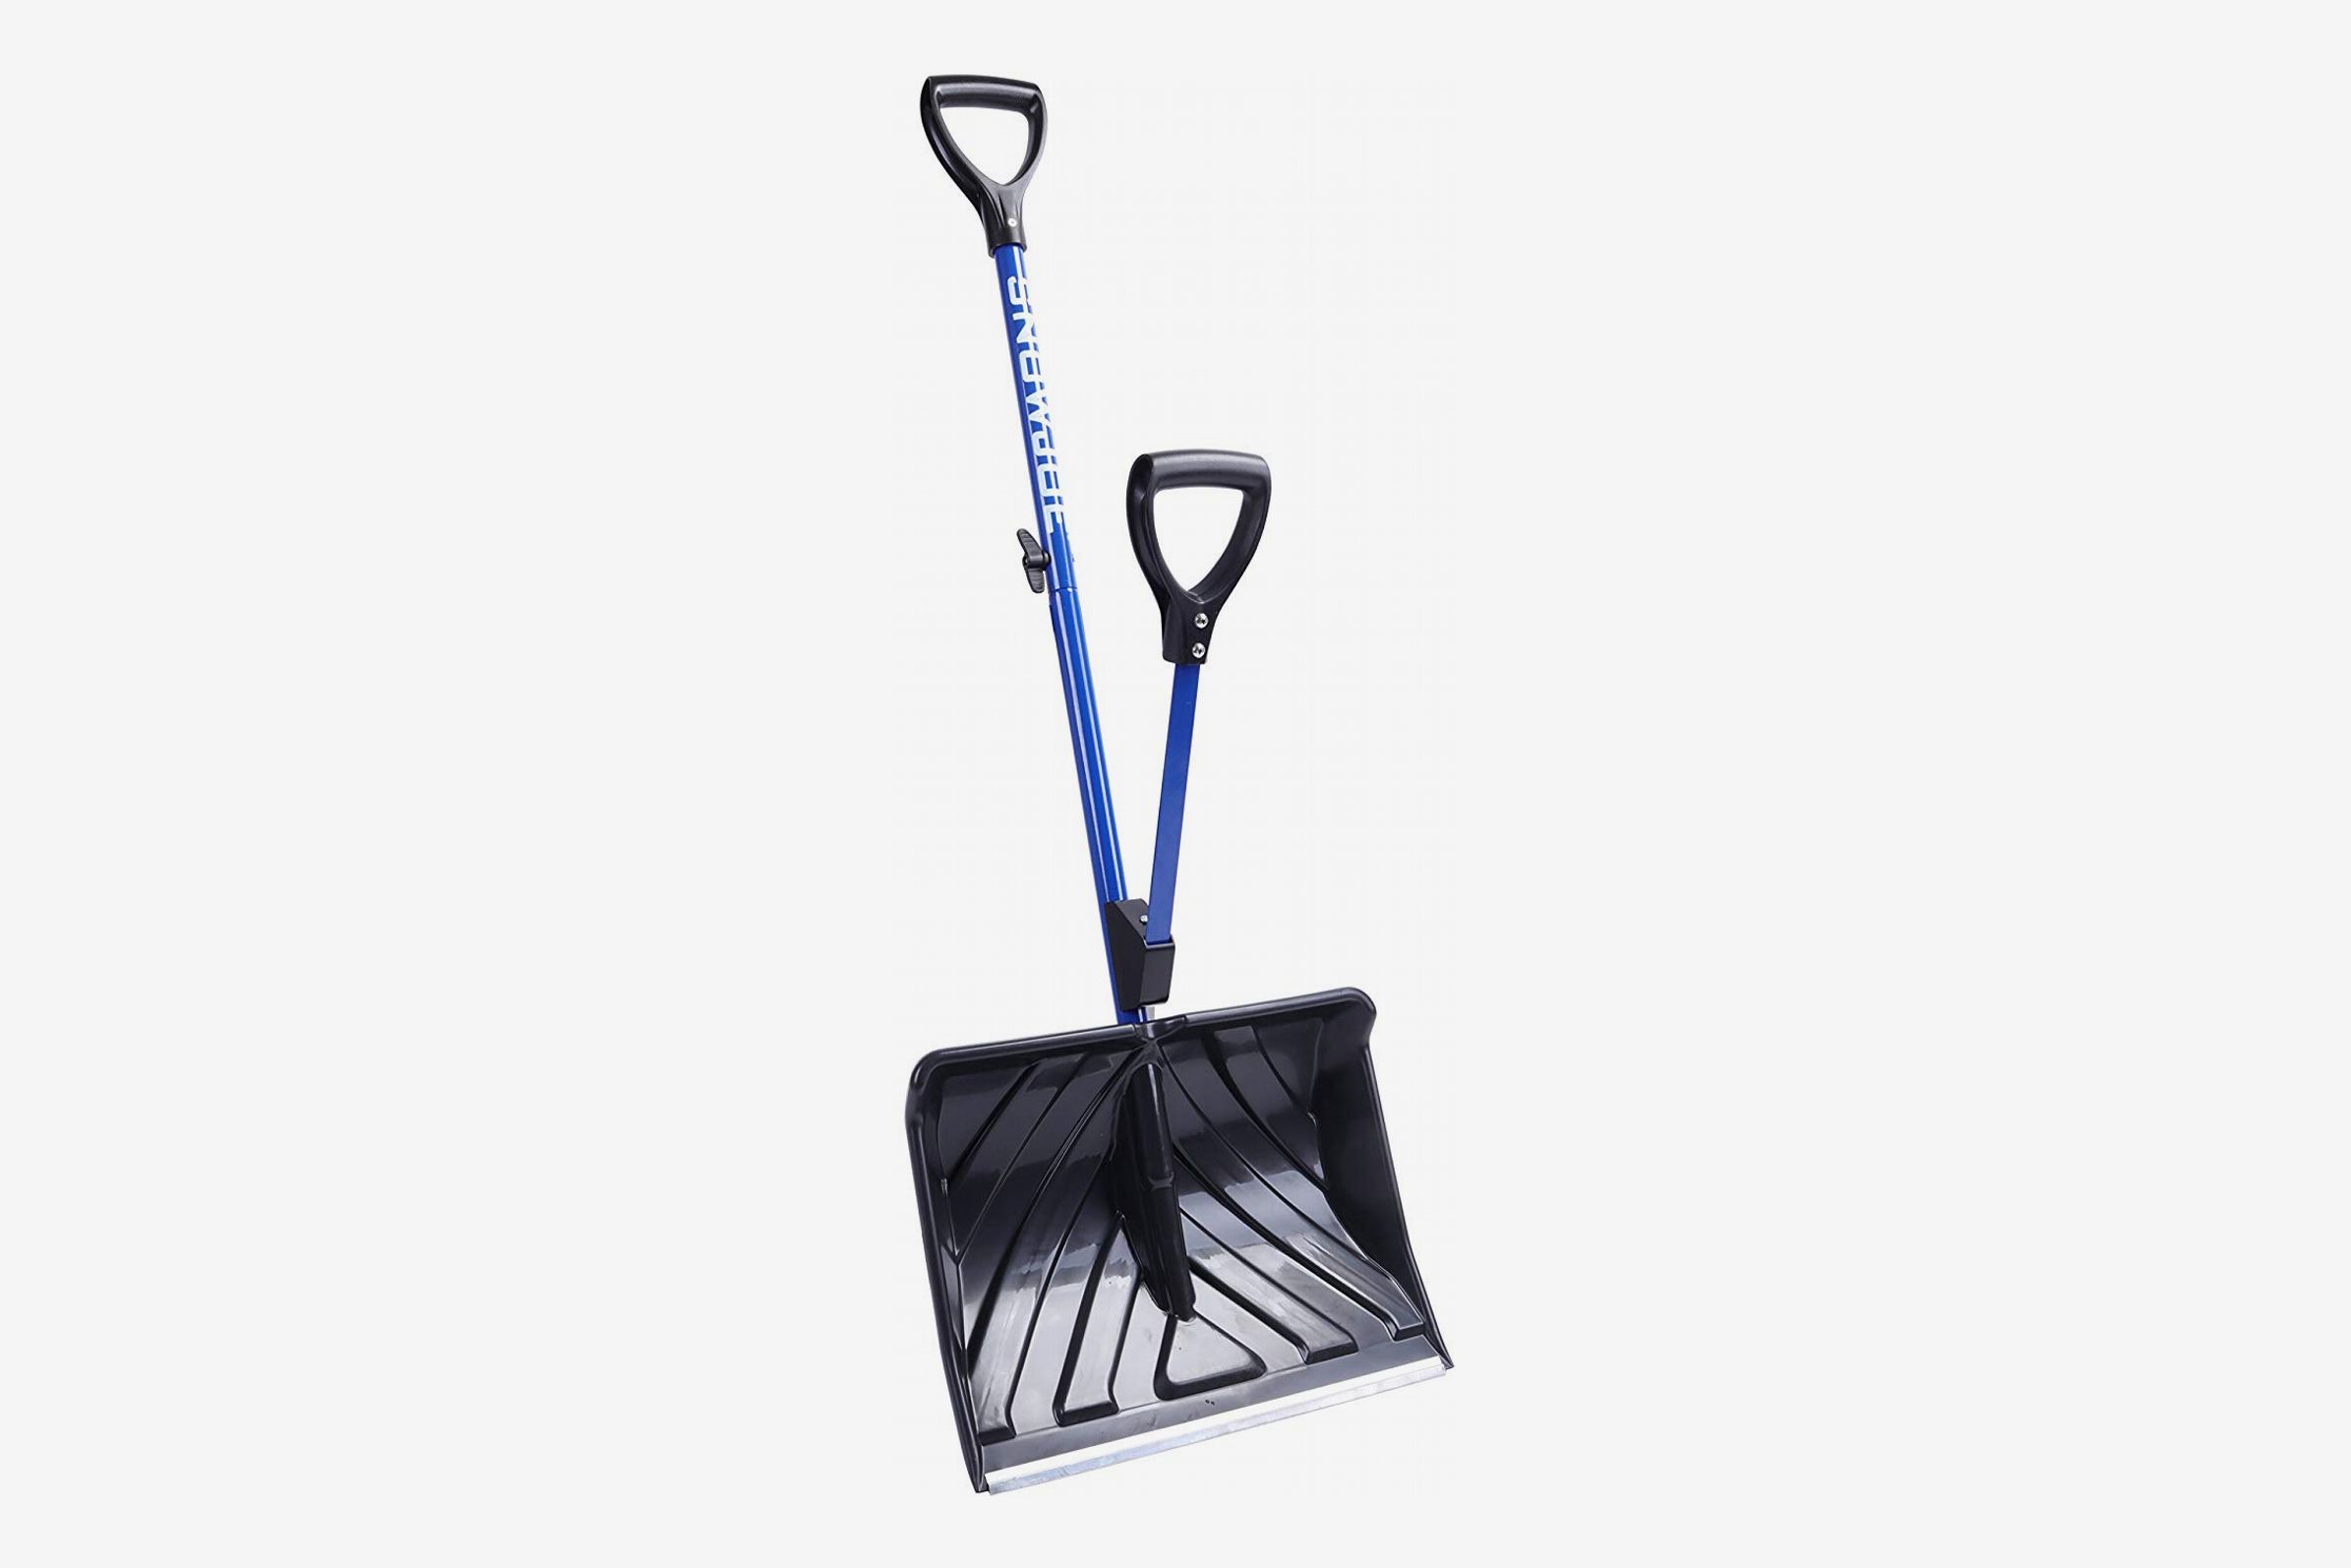 8 Blade Square Adjustable and Collapsible Folding Garden/Sport Utility Shovel ORIENTOOLS Emergency Snow Shovel Suitable for Car or Truck Storage